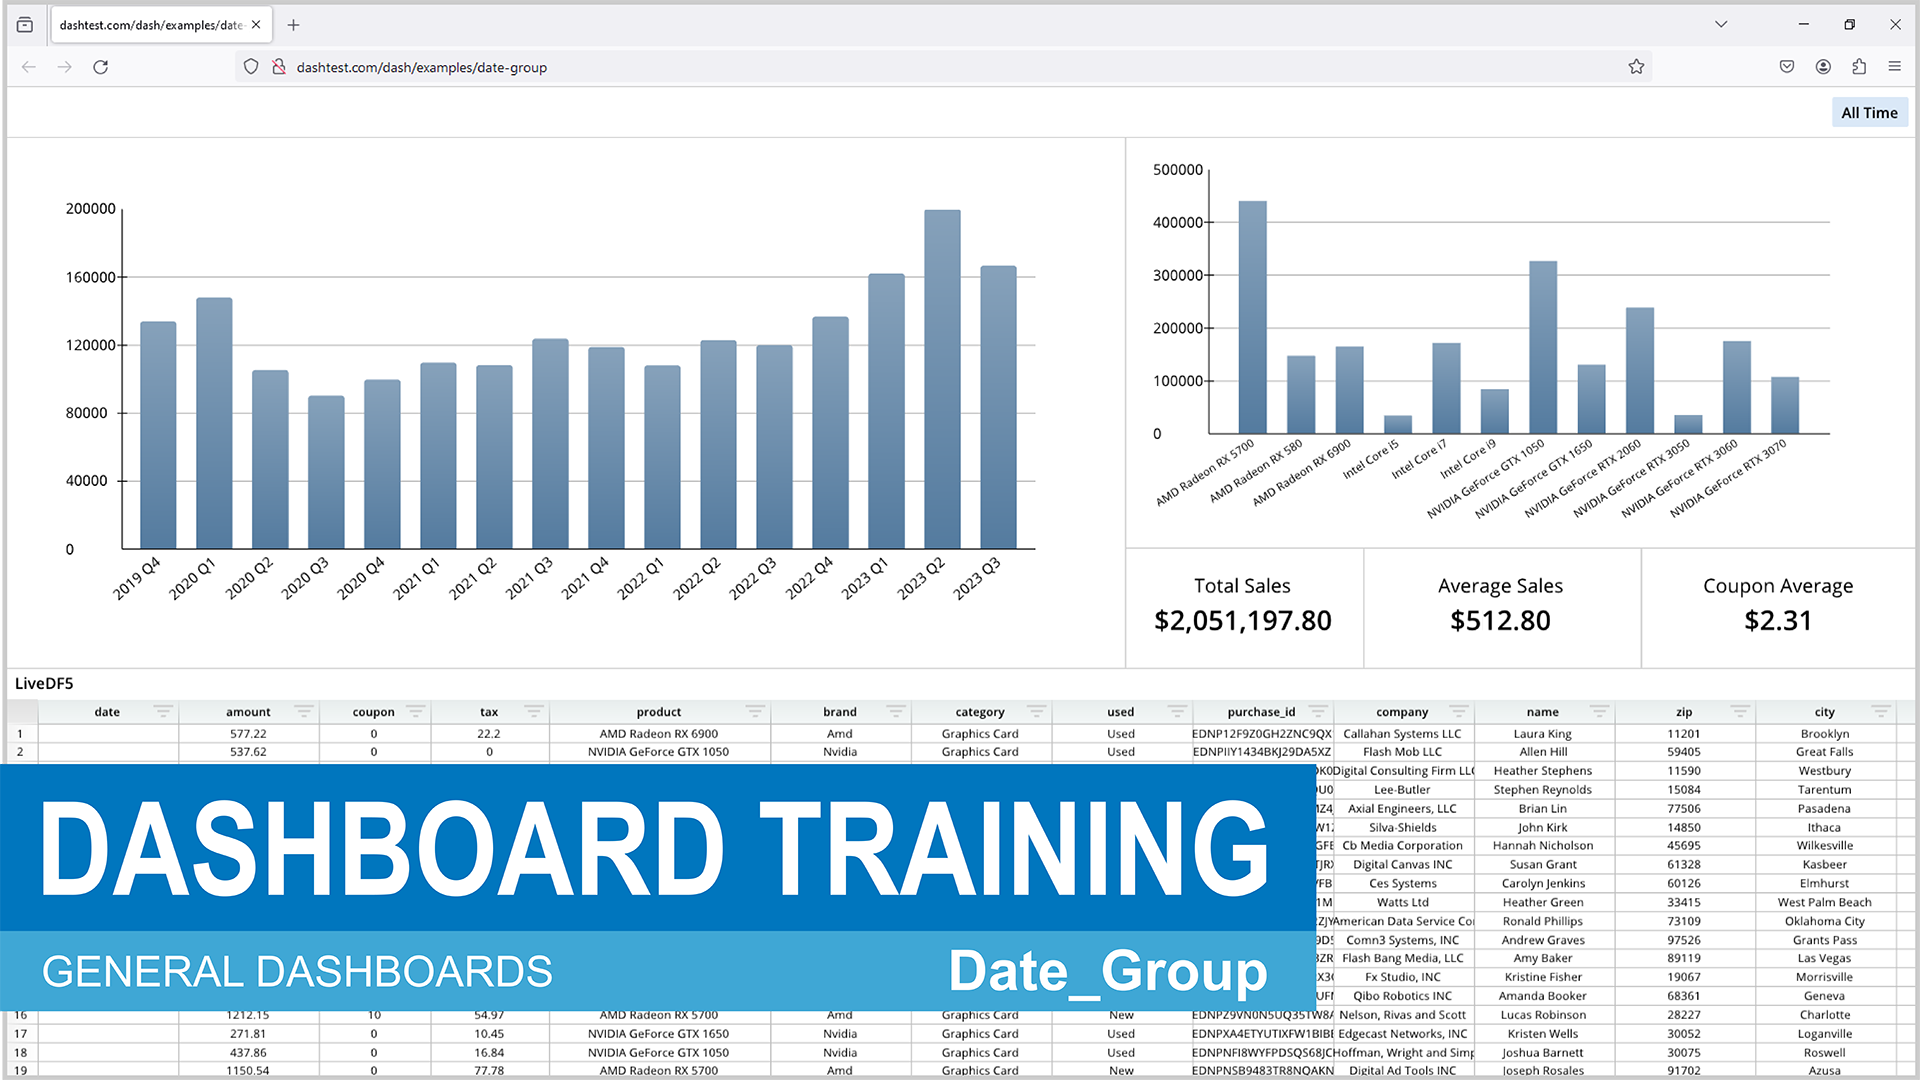 A screenshot of a dashboard training program, featuring a variety of graphs and charts.